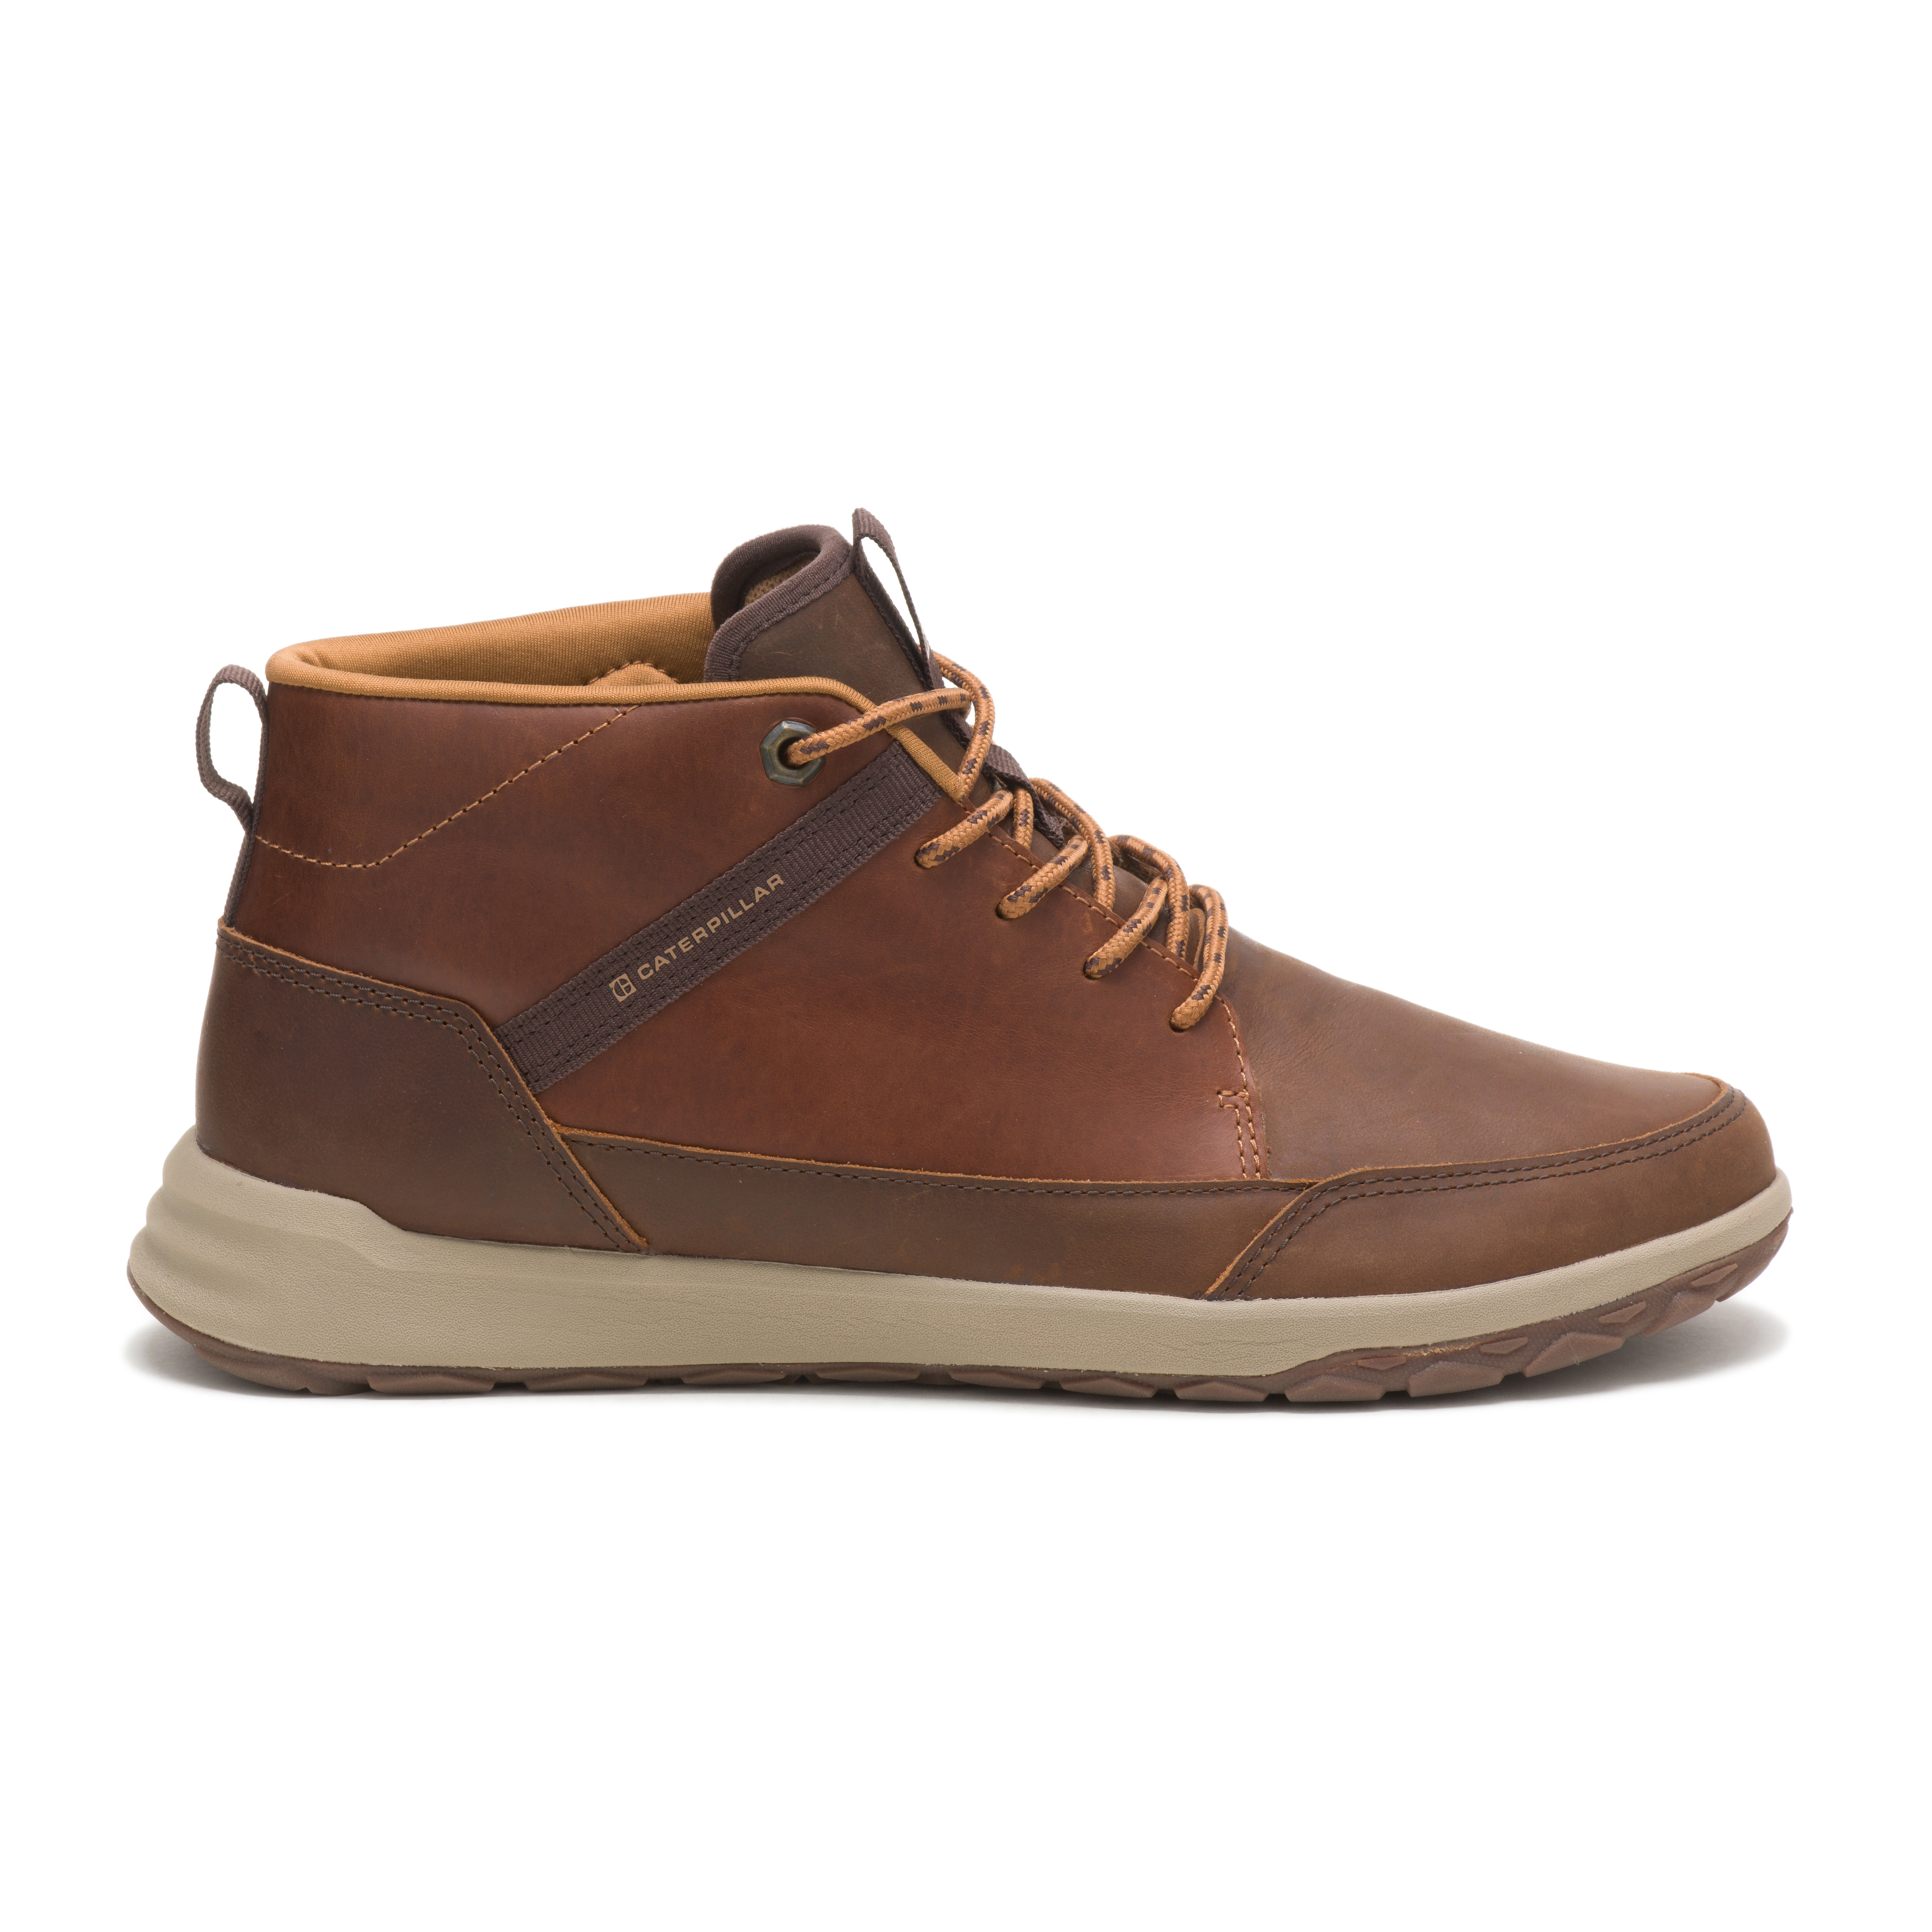 Caterpillar Shoes Online - Caterpillar Code Quest Mid Mens Casual Shoes Brown (328057-LZS)